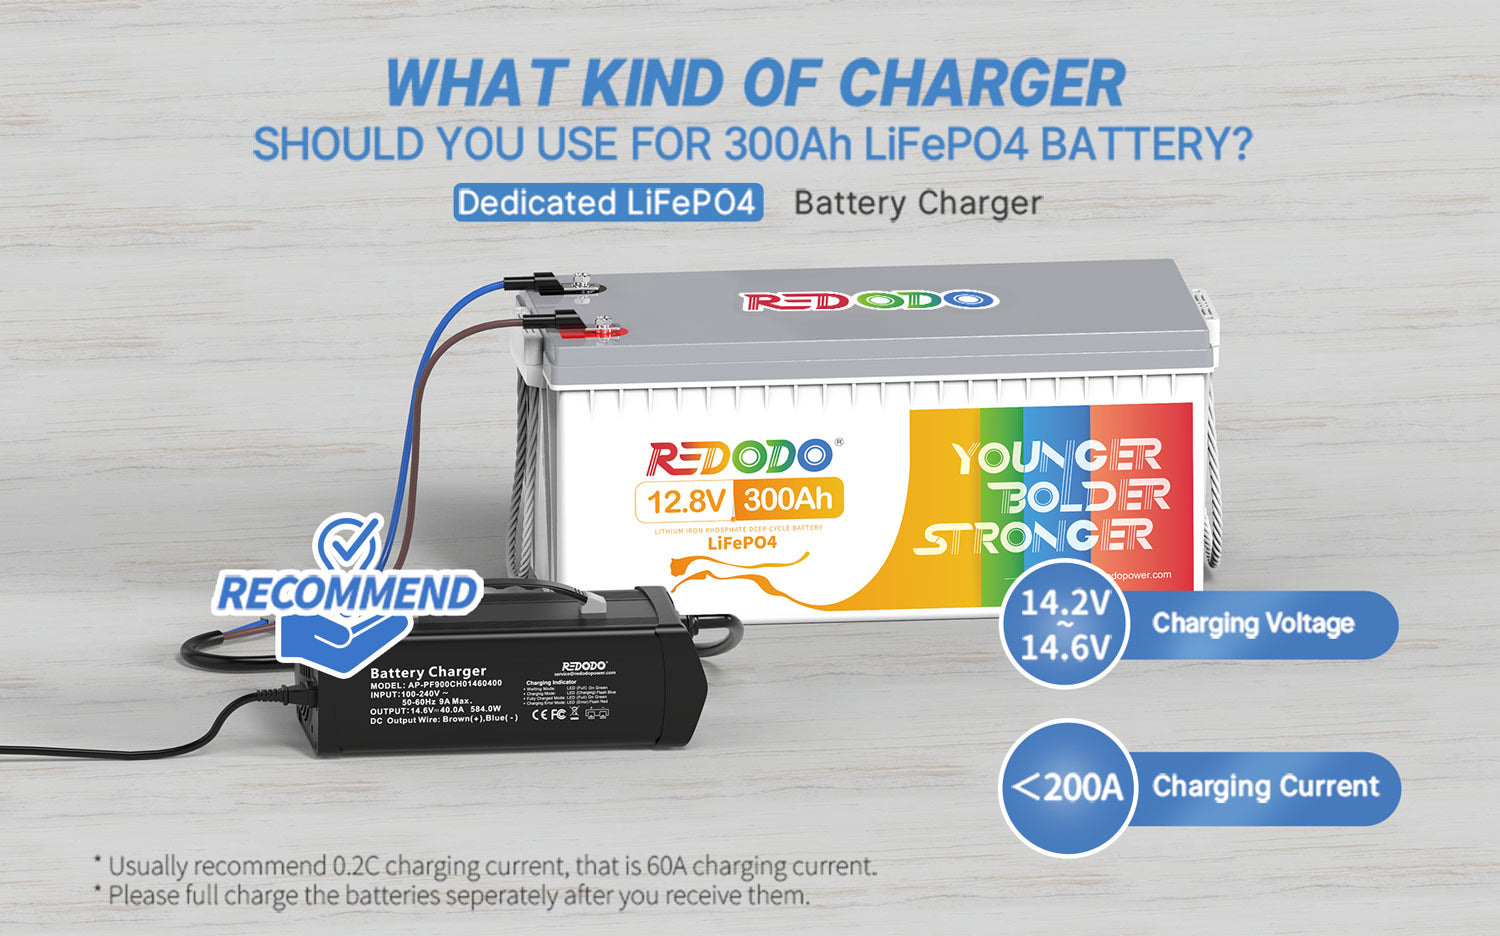 Redodo-12V-300Ah-rechargeable-lithium-battery